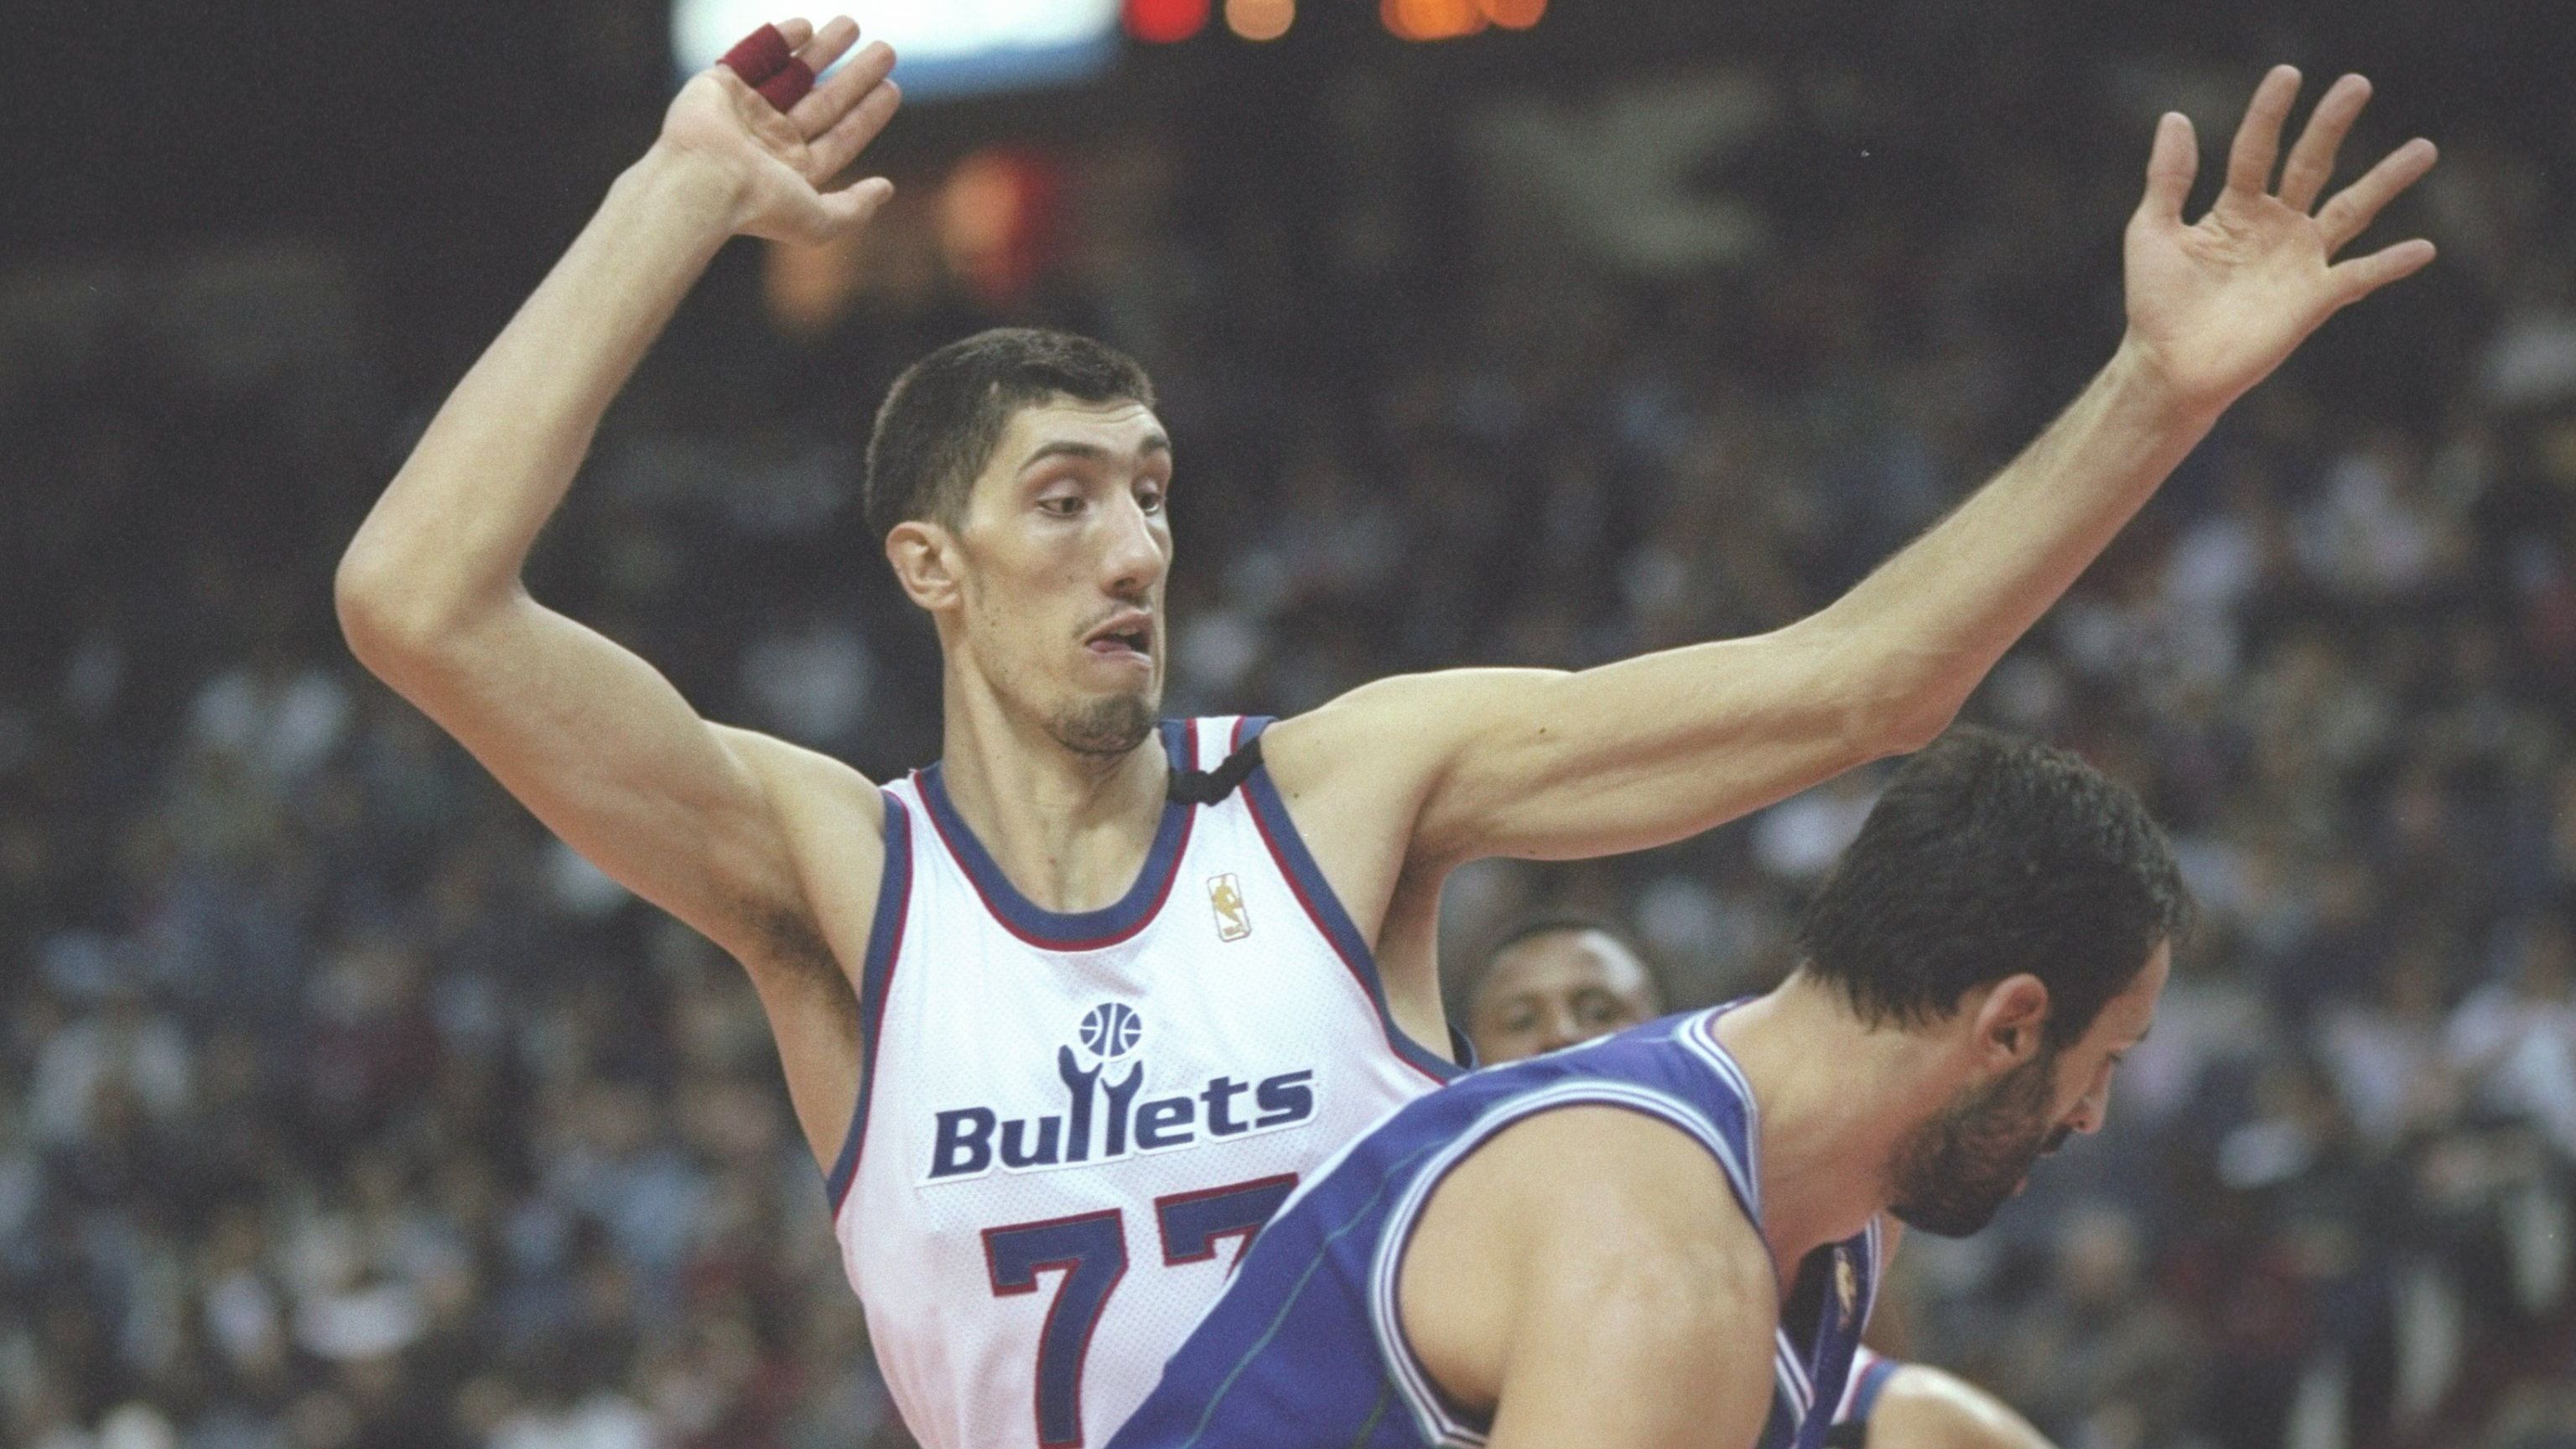 <strong>Gheorghe Muresan - 2,31m</strong><br><strong>Teams:</strong> Washington Bullets, New Jersey Nets<br><strong>Karriere-Stats:</strong> 9,8 Punkte, 6,4 Rebounds, 0,5 Assists, 1,5 Blocks<br><strong>Auszeichnungen:</strong> Most Improved Player